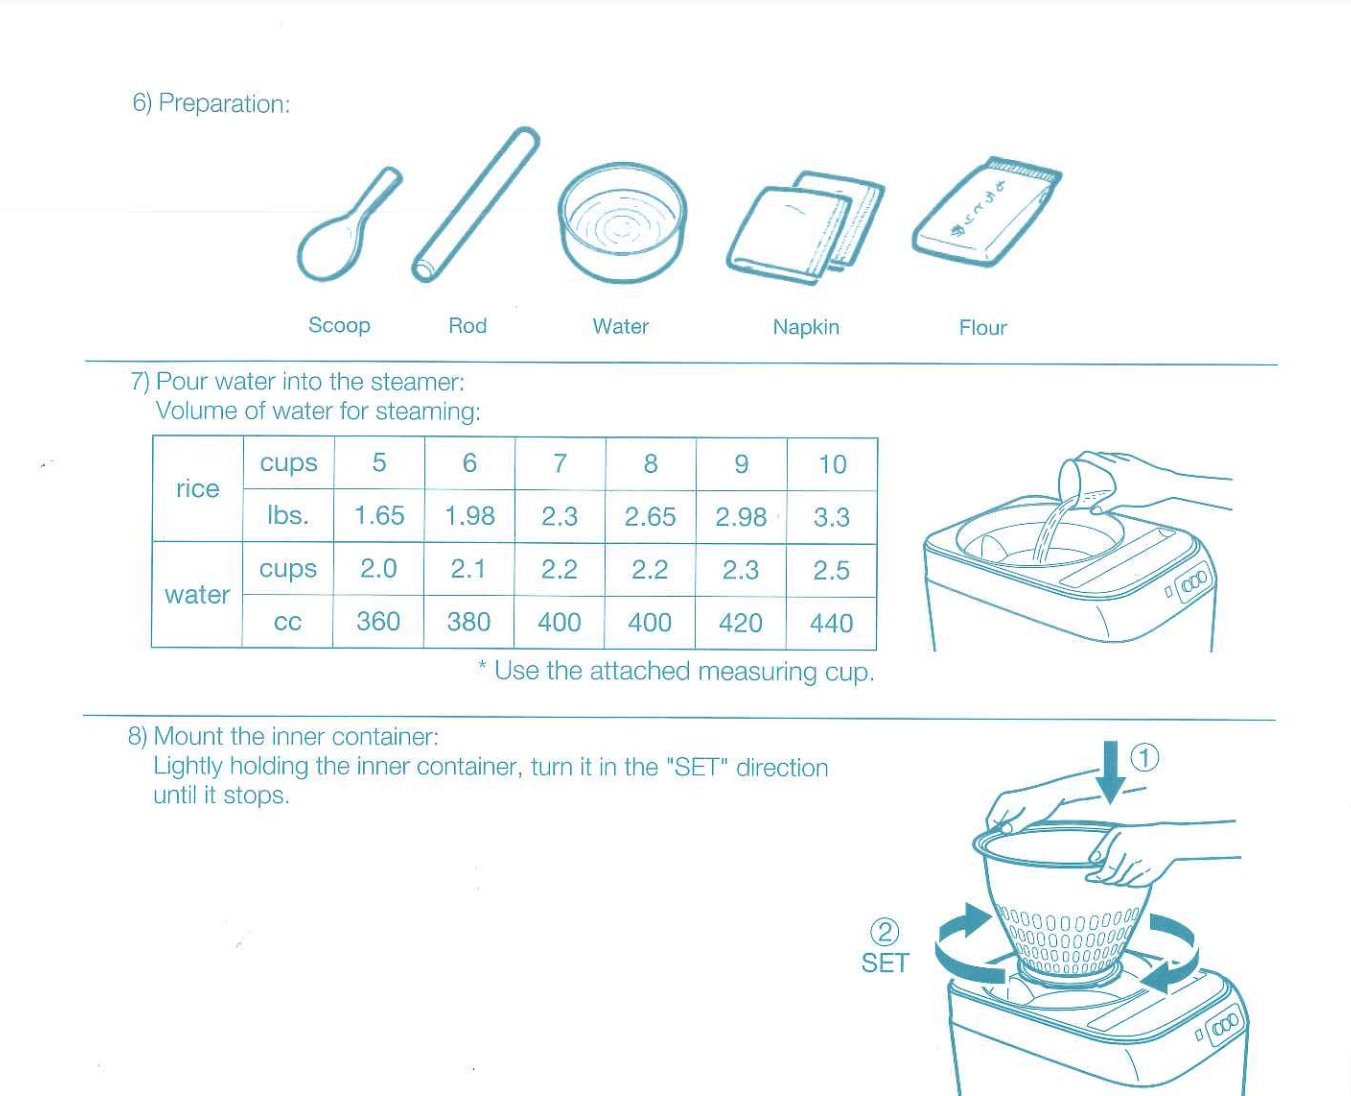 How To Make Mochi: A Step-by-Step Guide